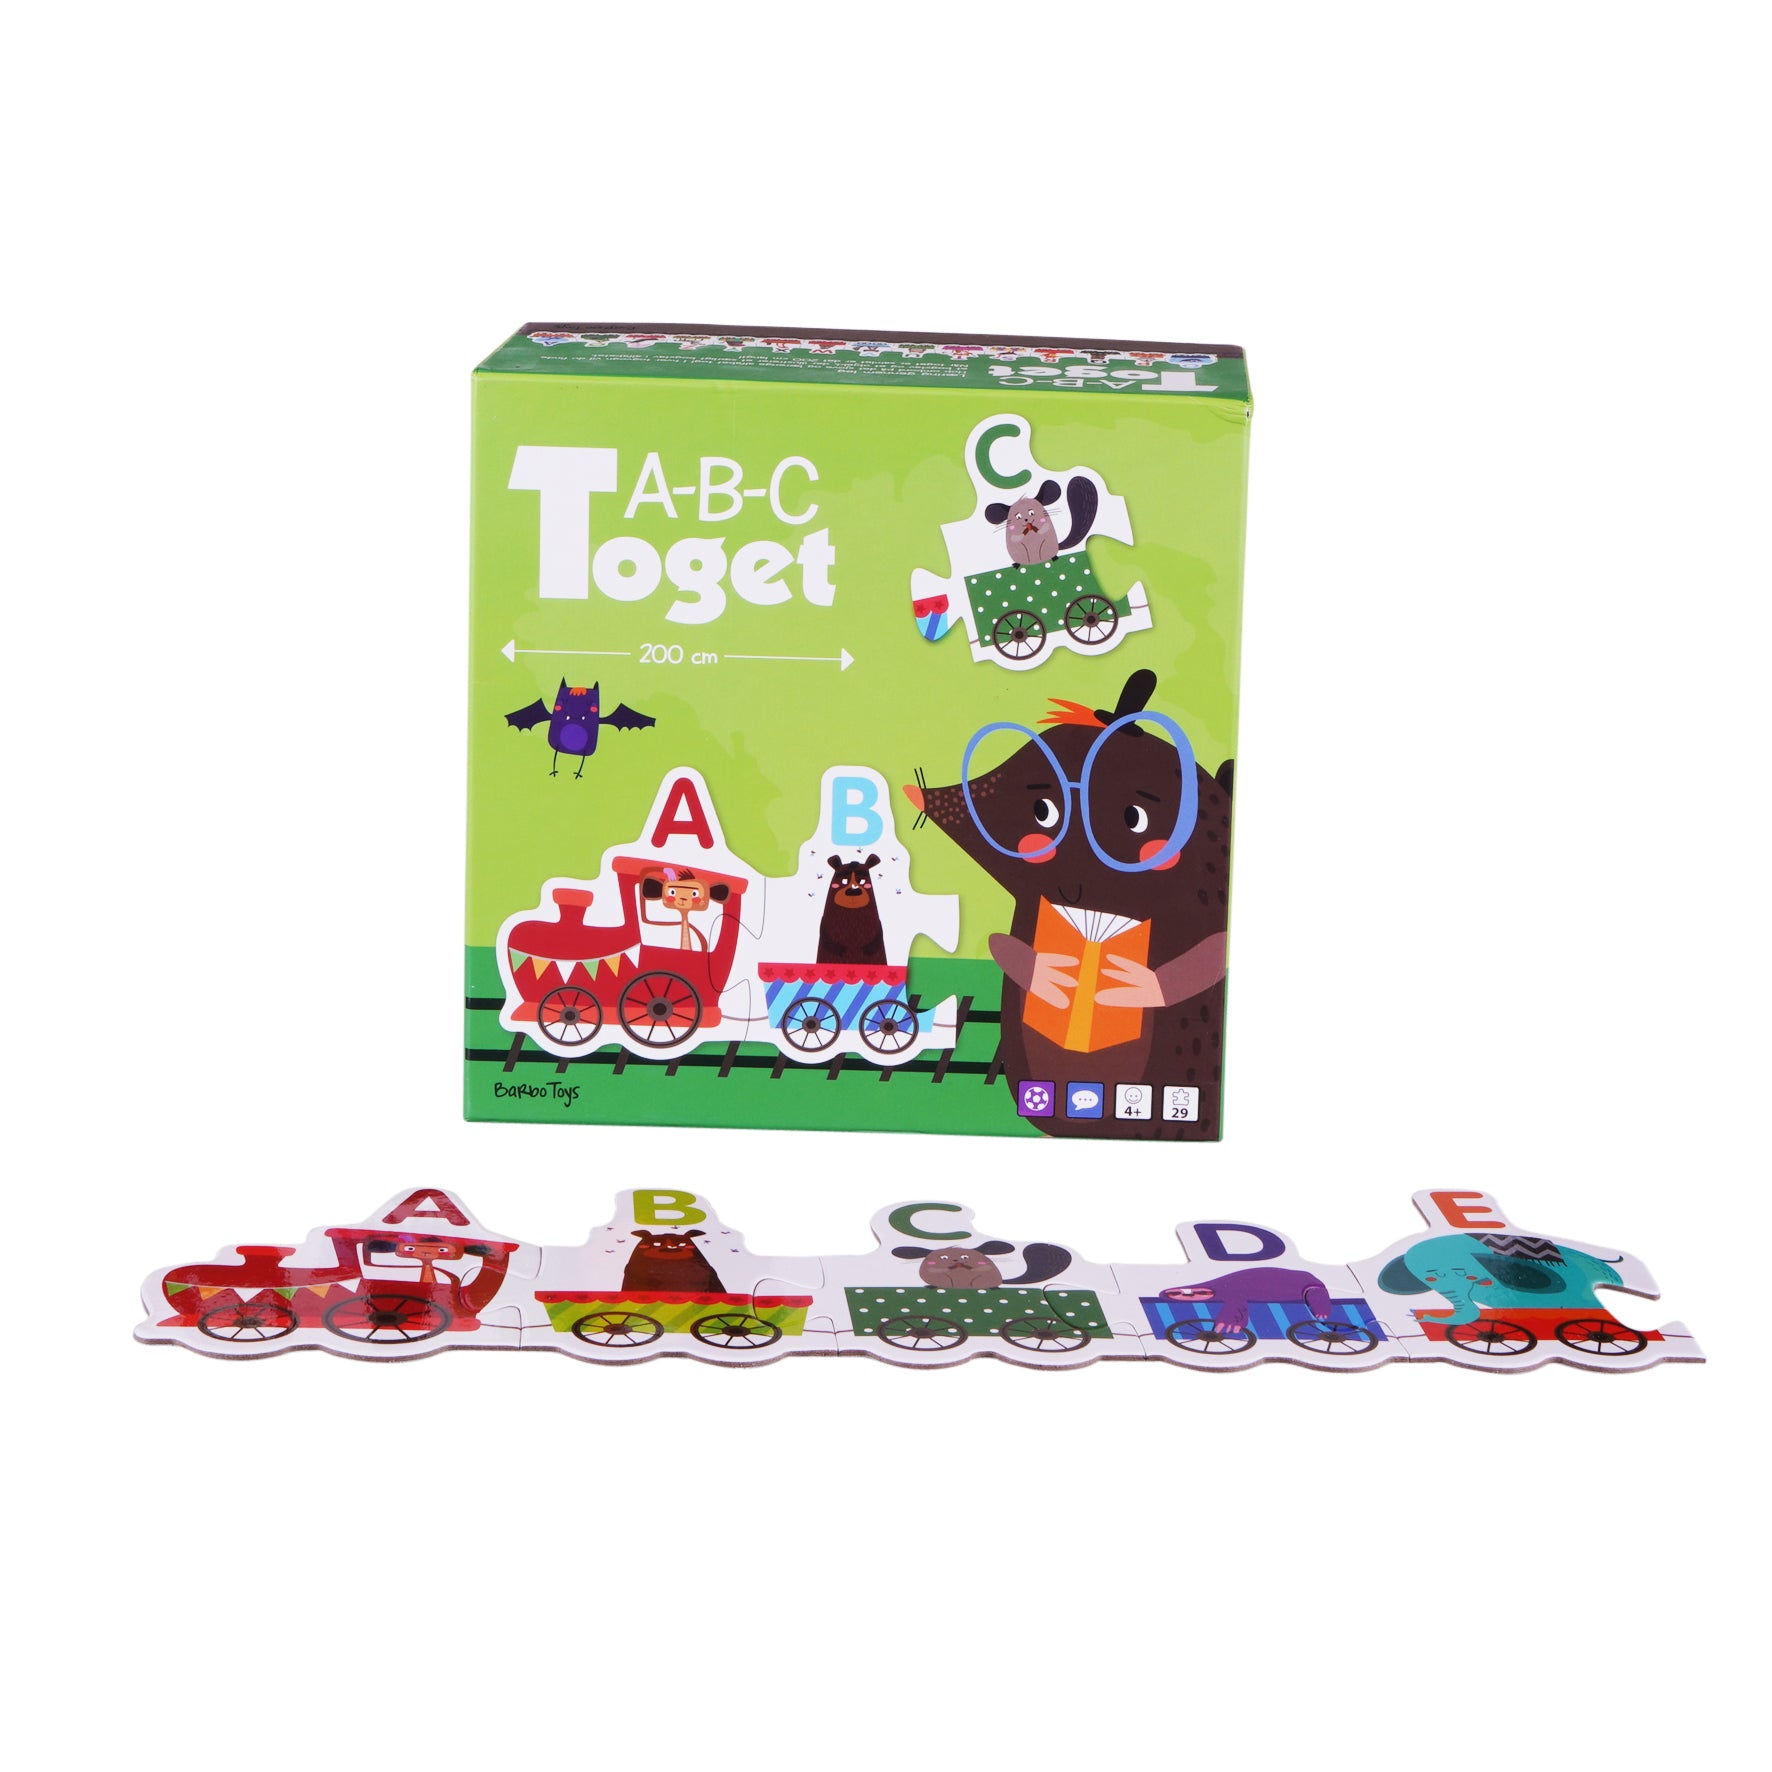 a b c toget box game with puzzle pieces